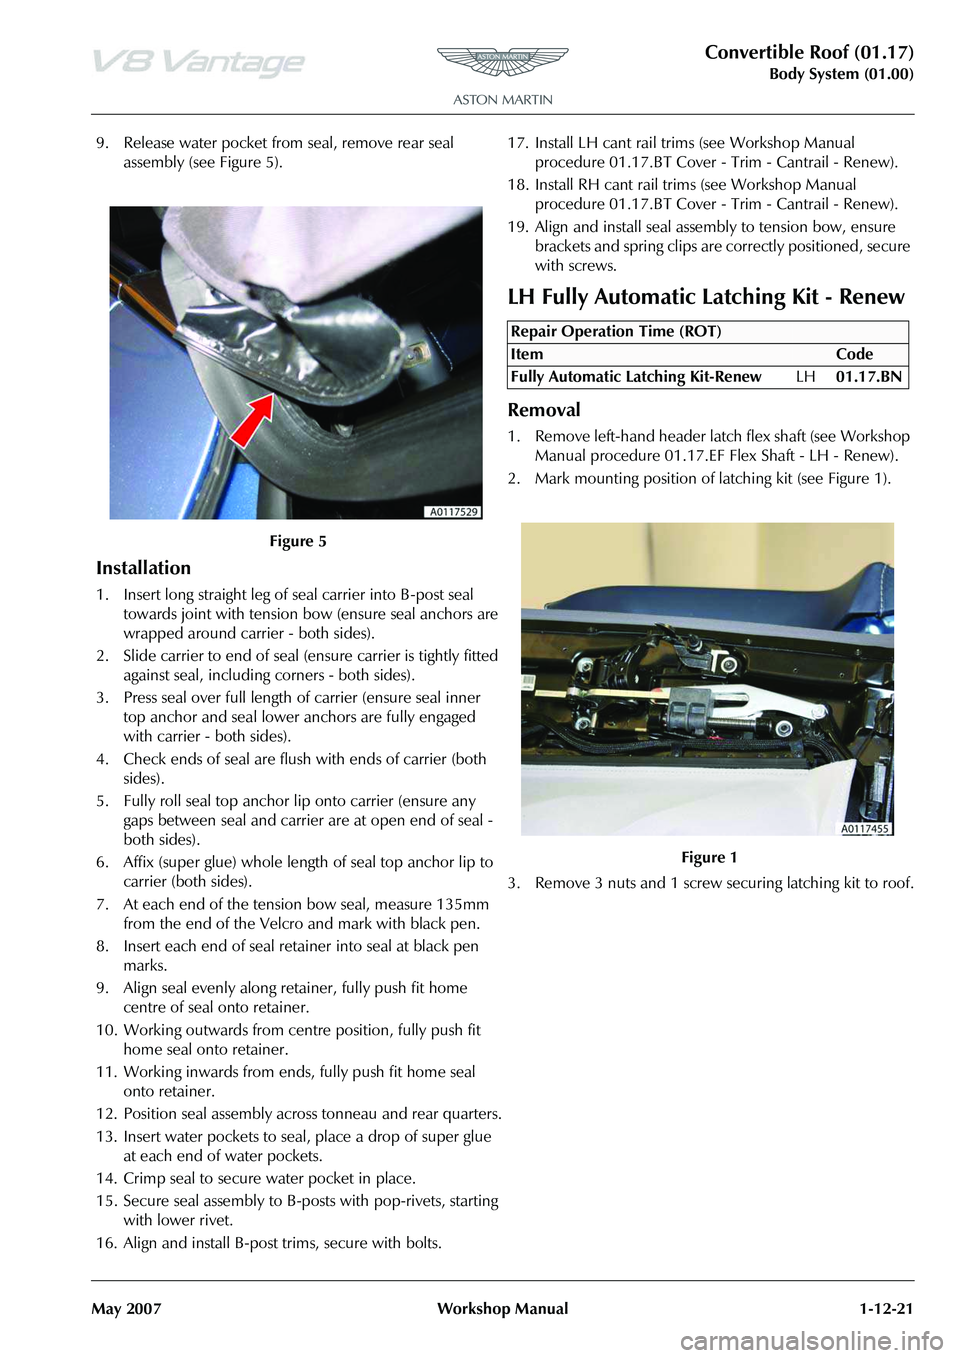 ASTON MARTIN V8 VANTAGE 2010  Workshop Manual Convertible Roof (01.17)
Body System (01.00)
May 2007 Workshop Manual 1-12-21
9. Release water pocket from seal, remove rear seal  assembly (see Figure 5).
Installation
1. Insert long straight leg of 